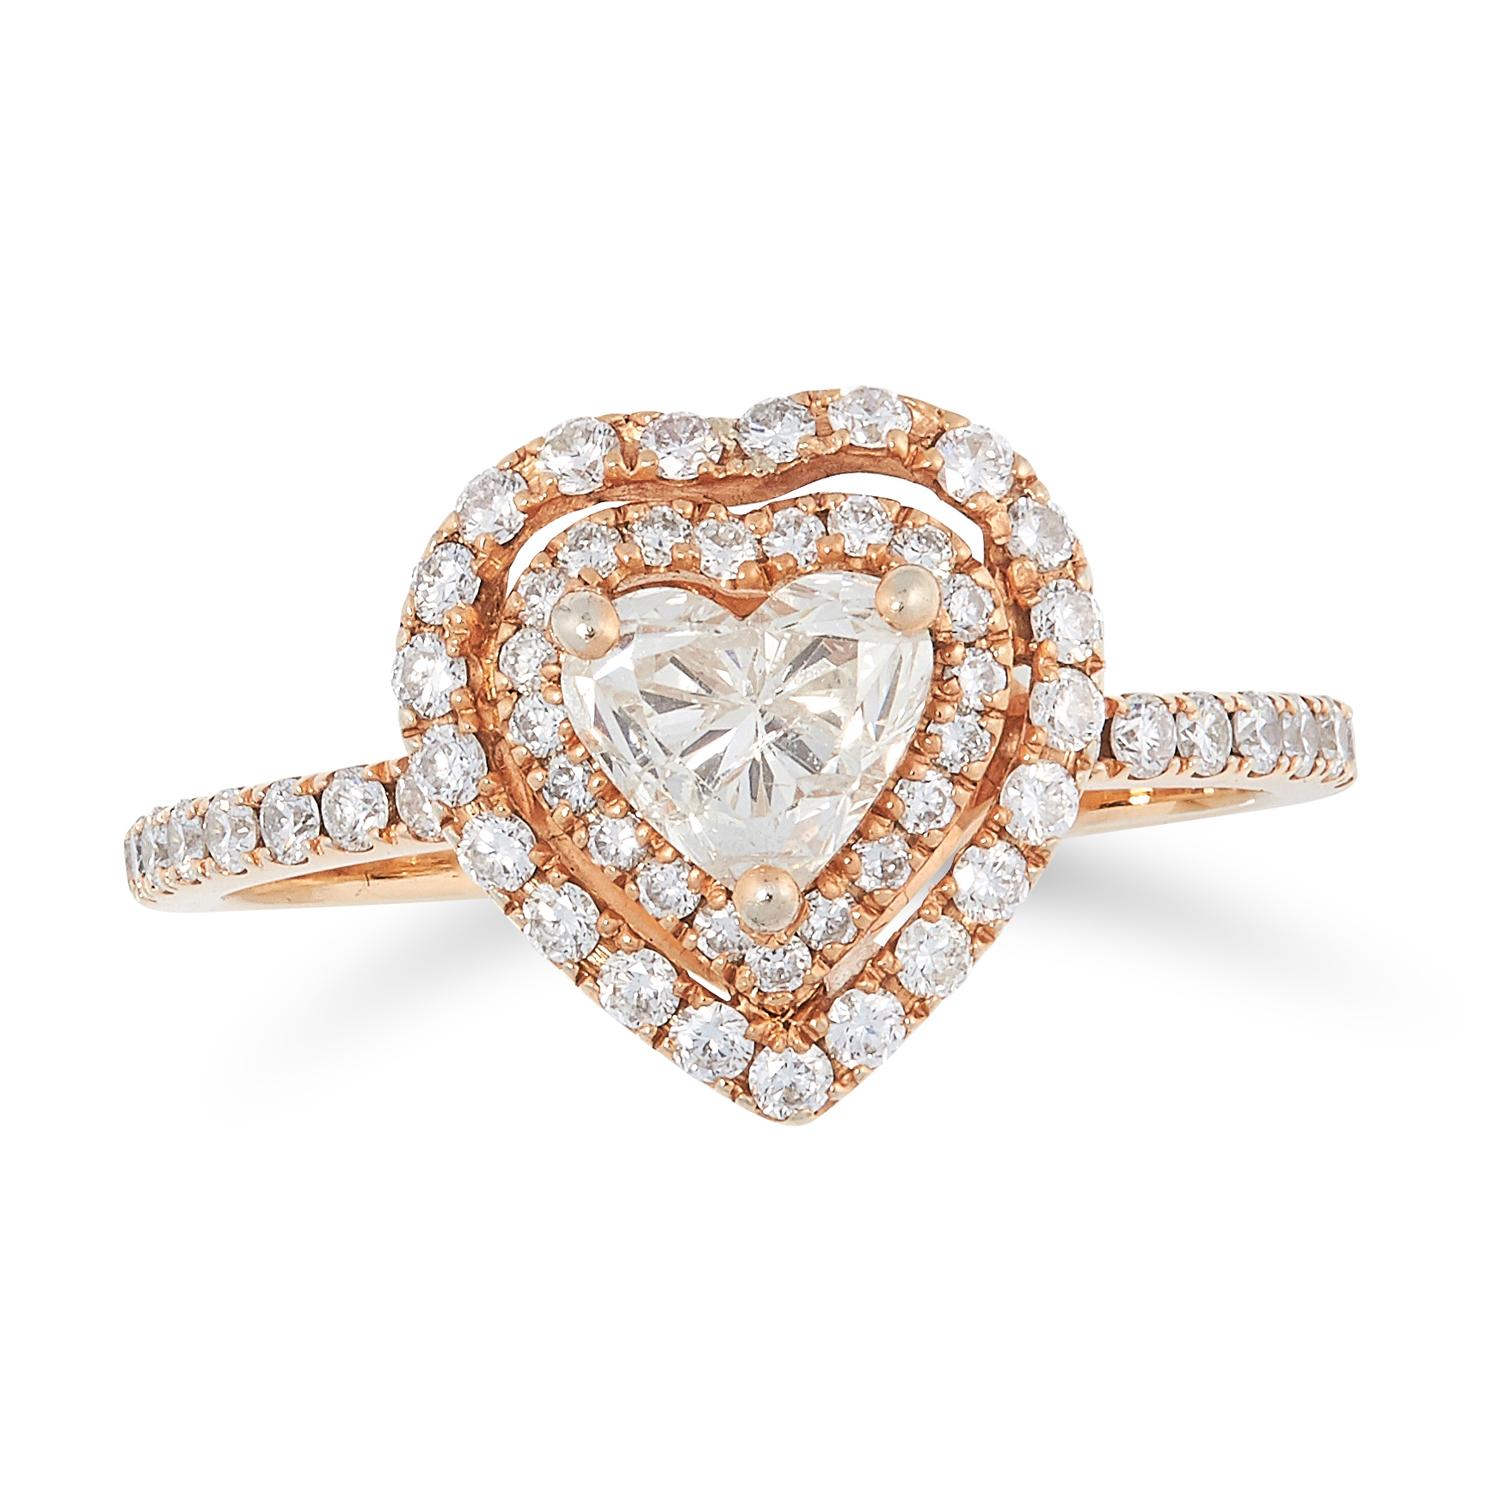 A HEART SHAPED DIAMOND RING set with a central heart cut diamond of 0.70 carats in a double halo